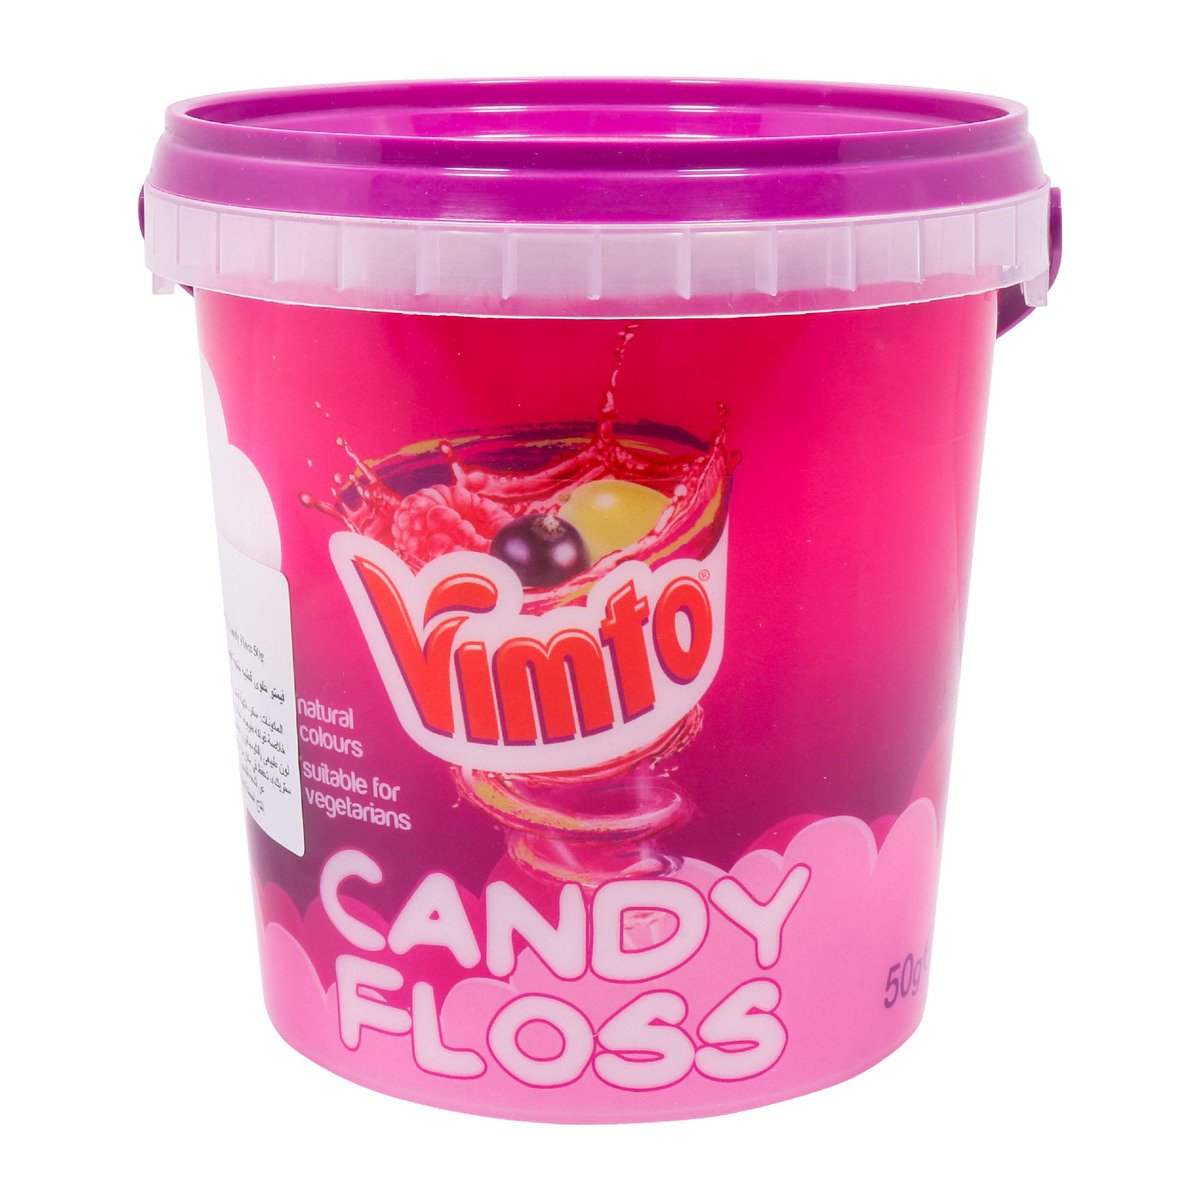 Vimto Candy Floss 50 g